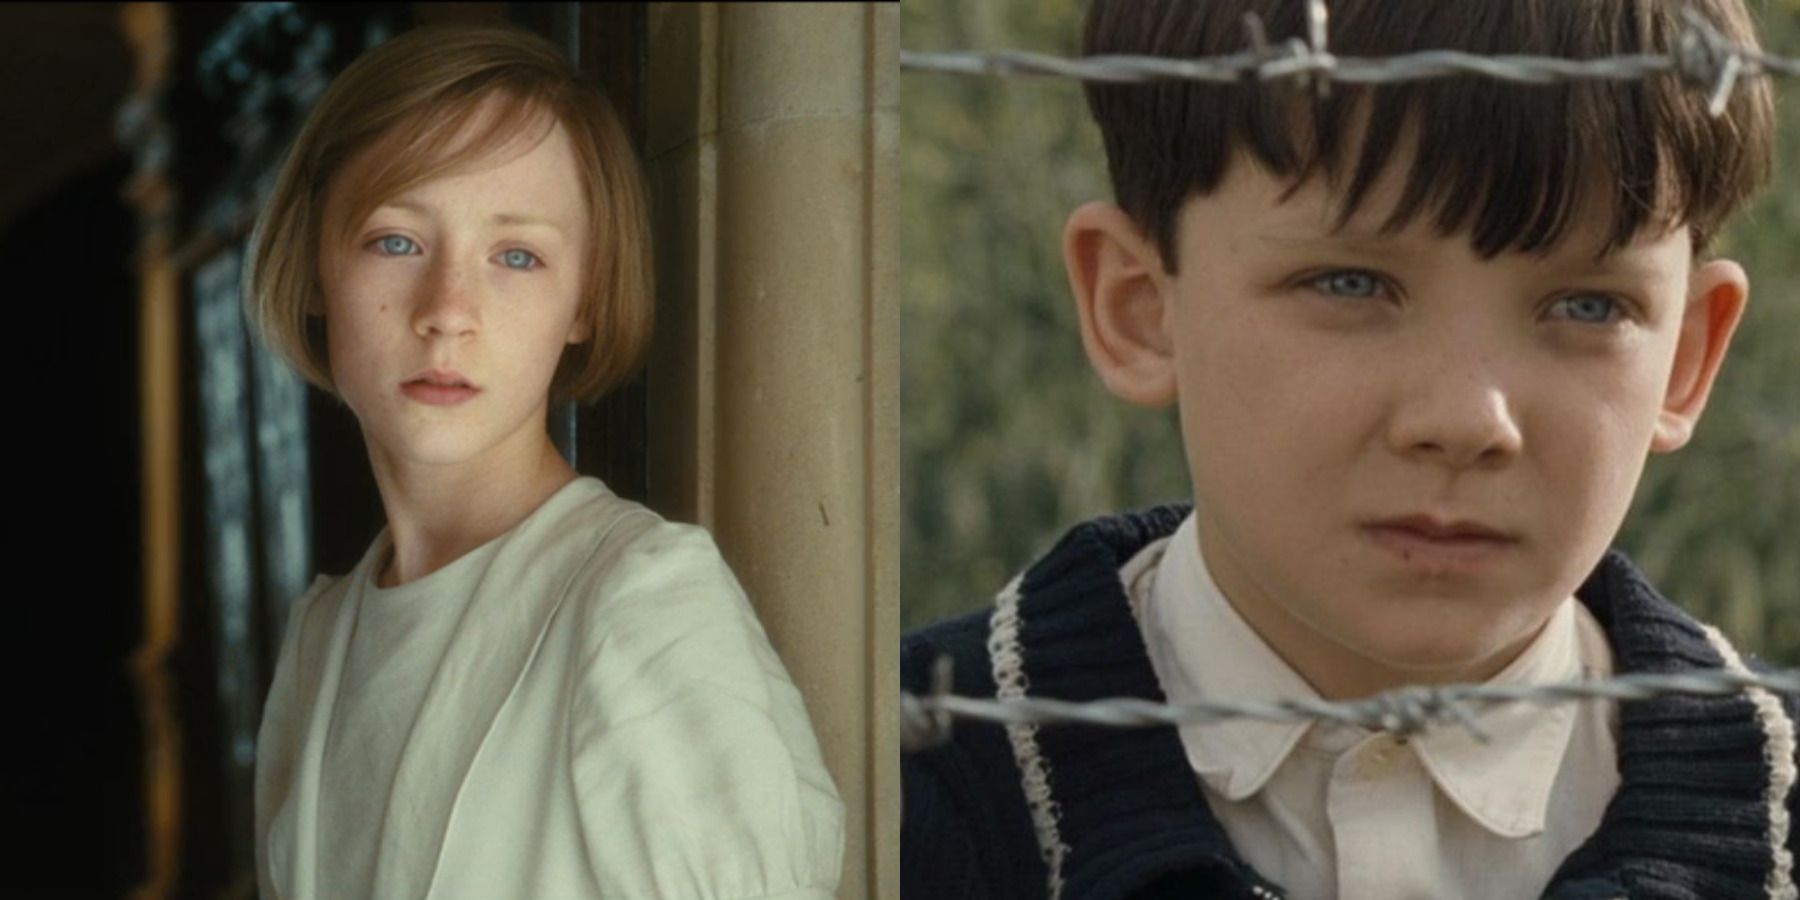 Movies you won't want to watch twice feature split image Atonement and The Boy in the Striped Pajamas